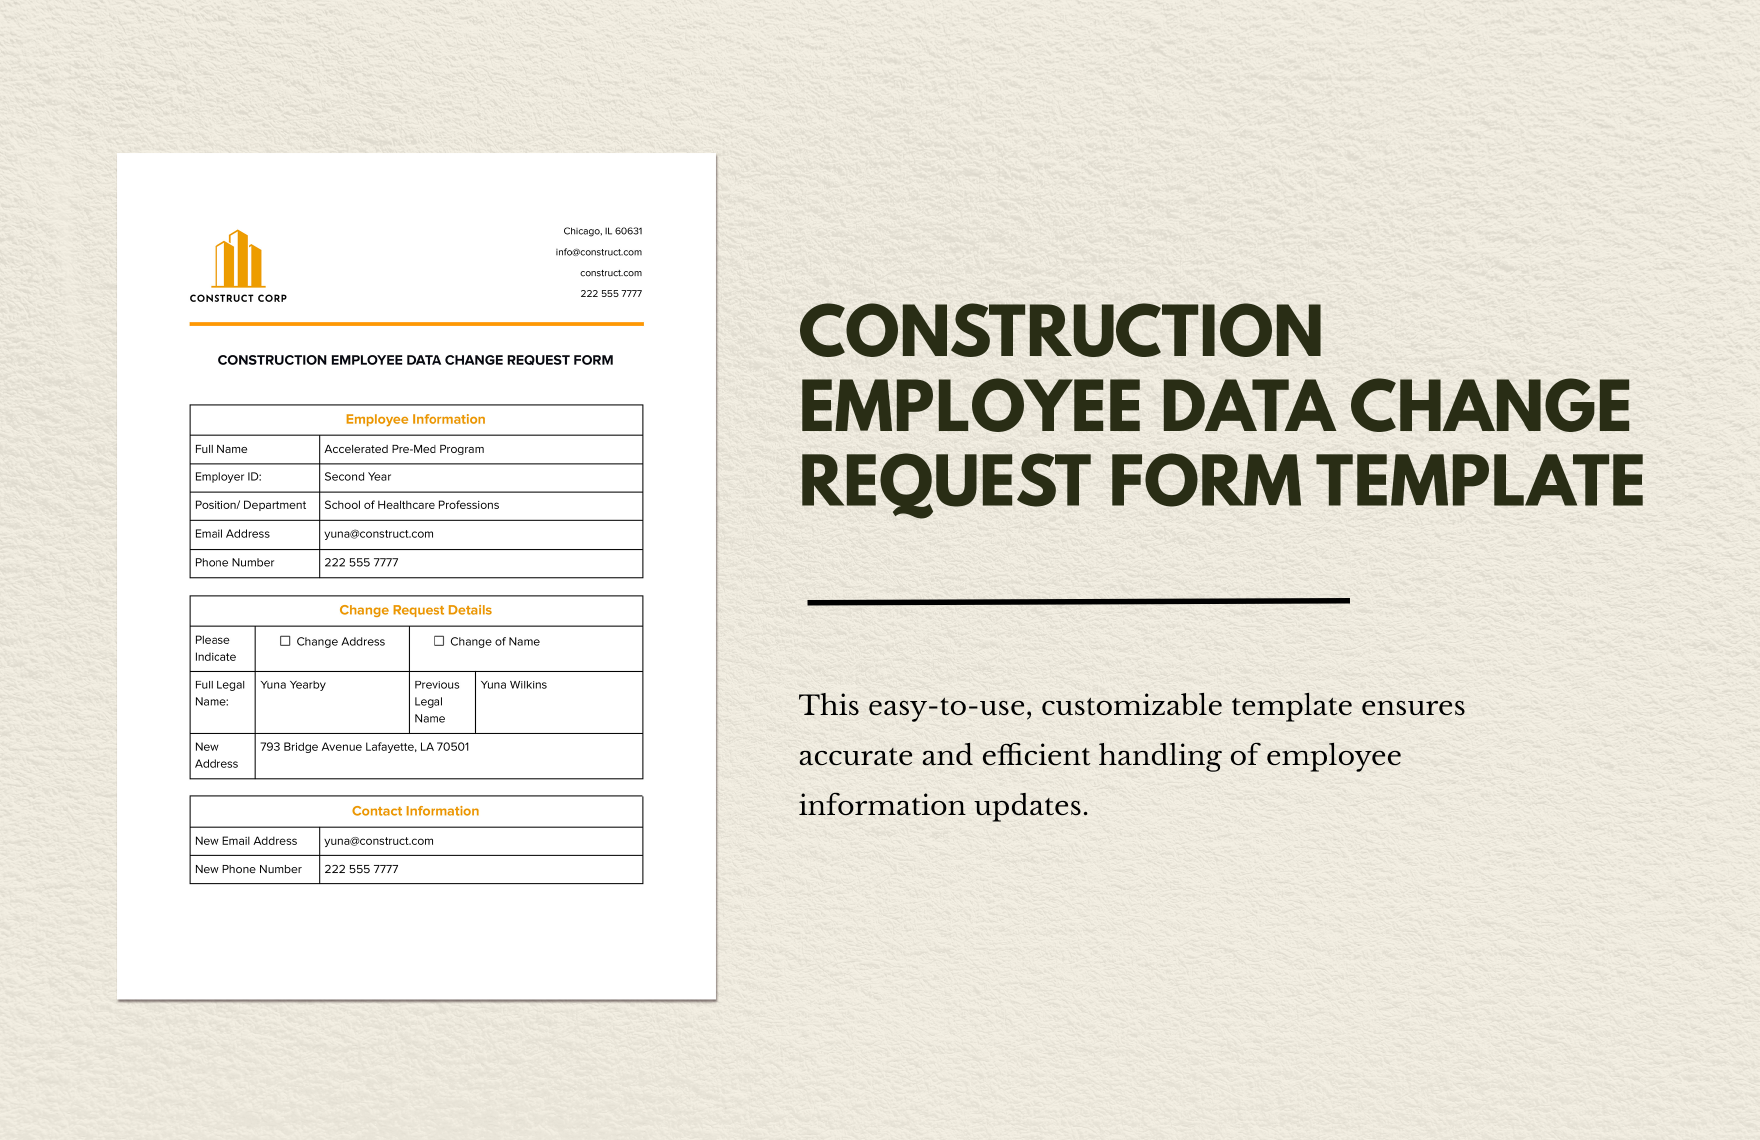 Construction Employee Data Change Request Form